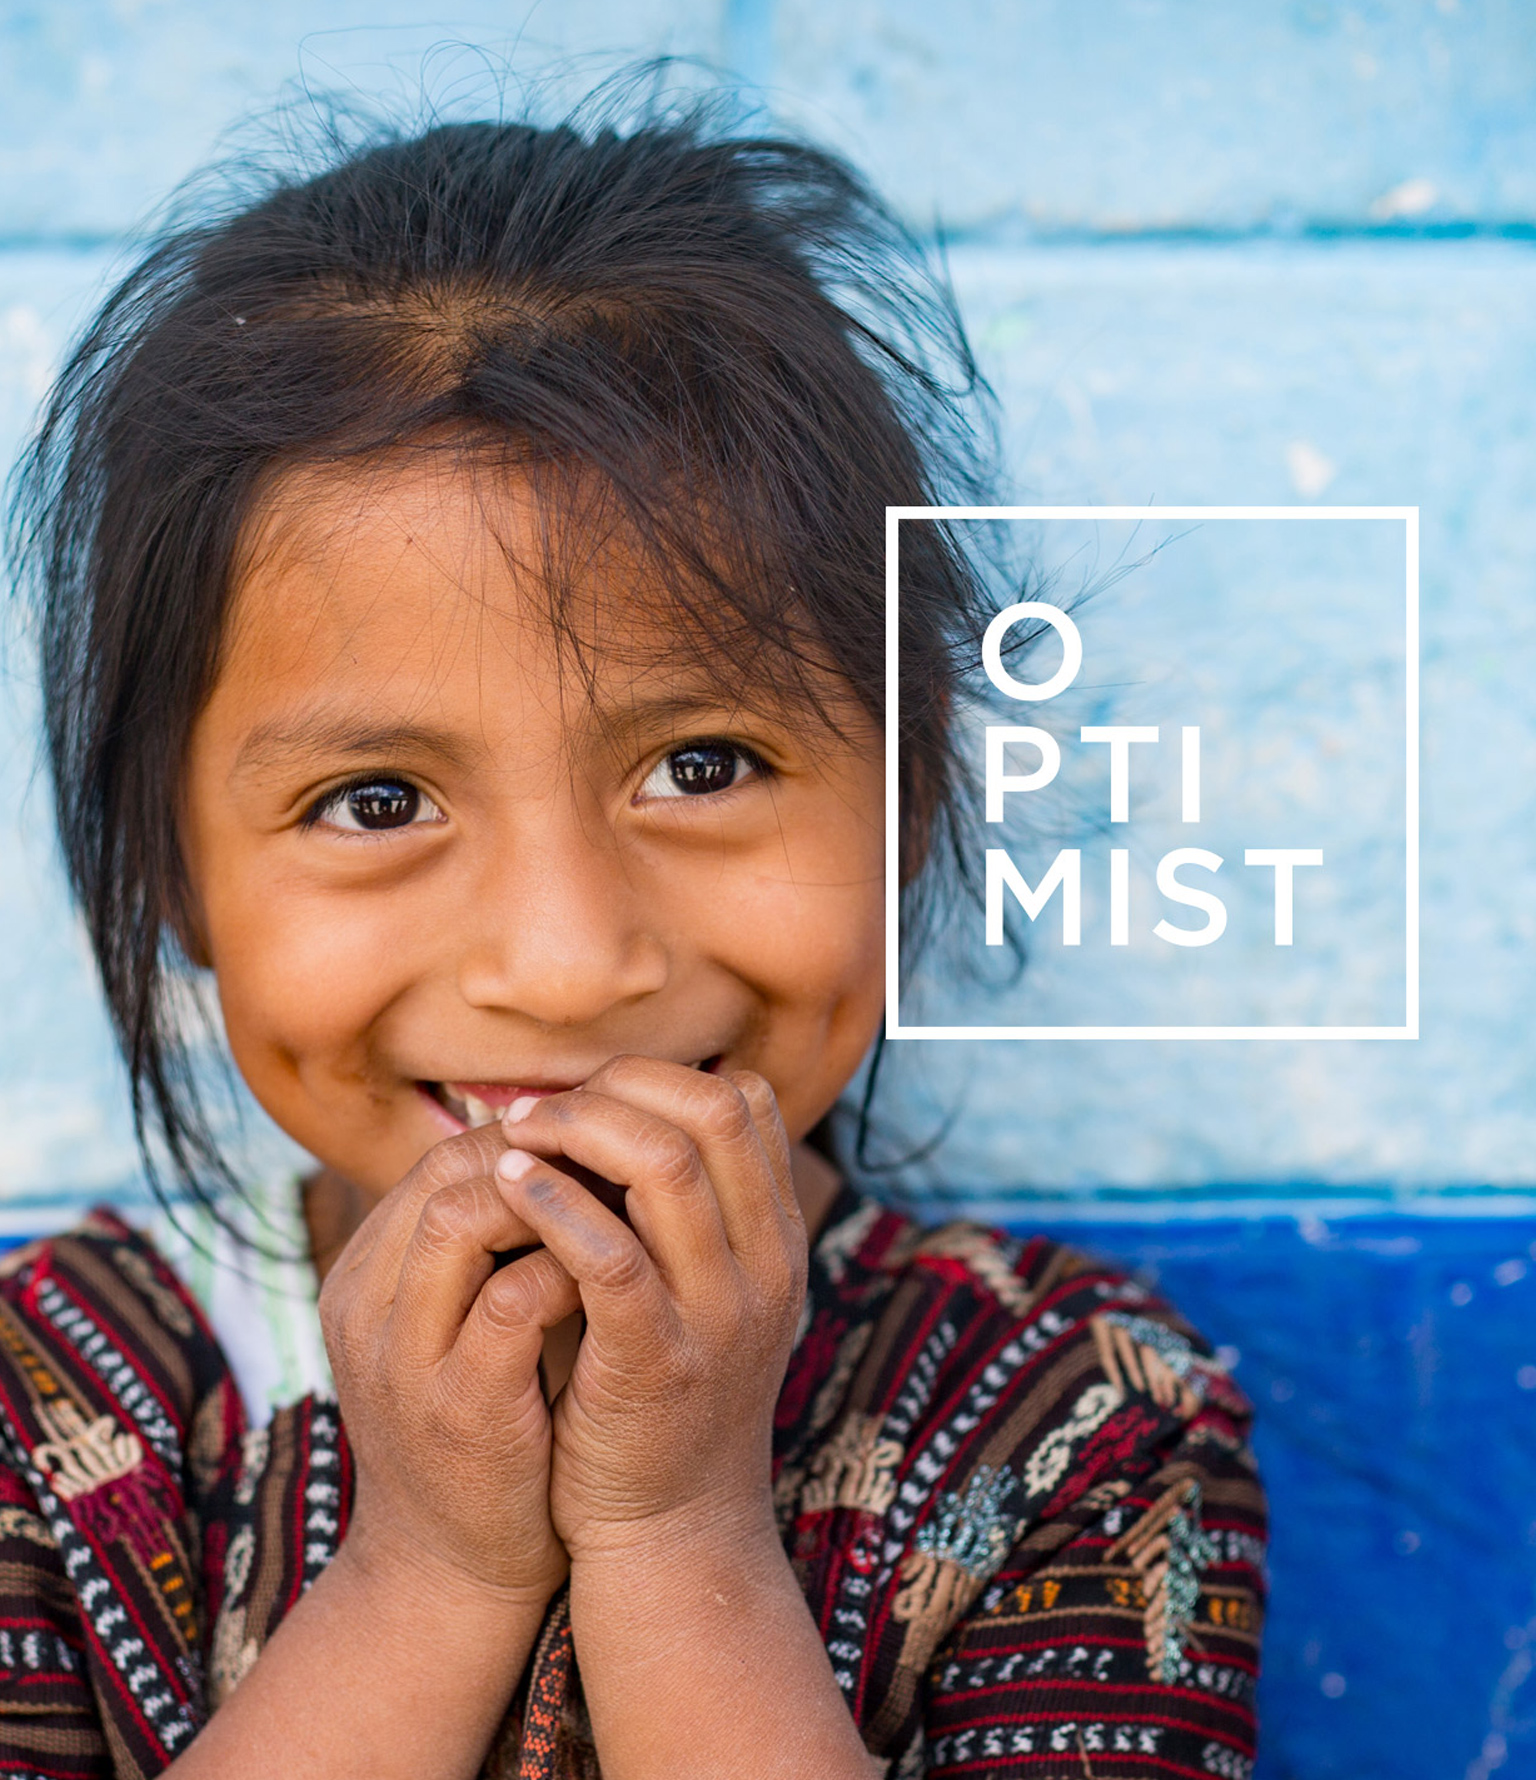 honduran girl smiling with hands in mouth in front of blue wall with optimist logo on image